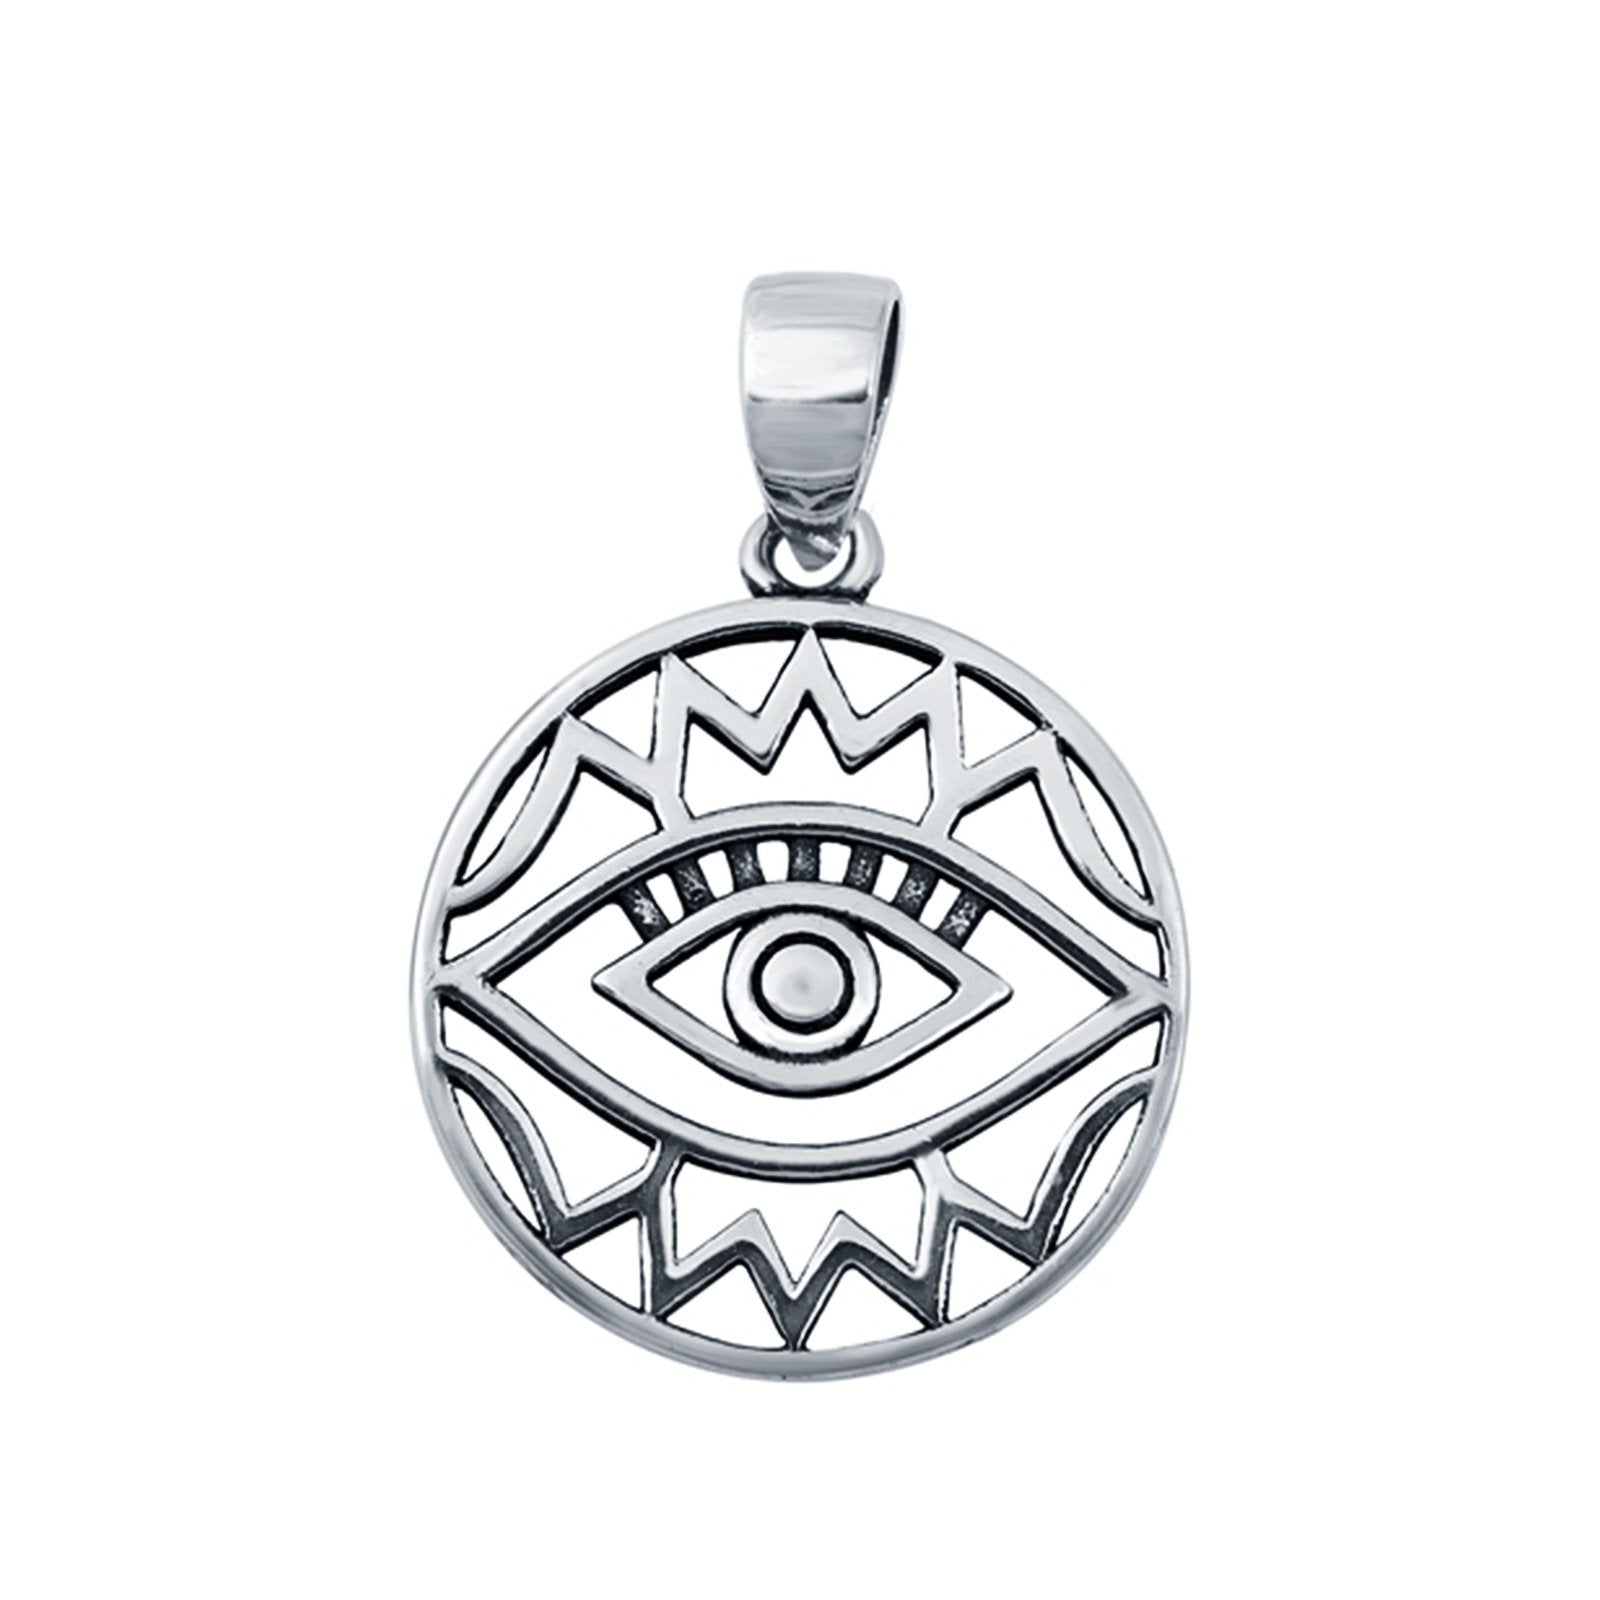 All Seeing Eye Charm Pendant 925 Sterling Silver Fashion Jewelry (16mm)